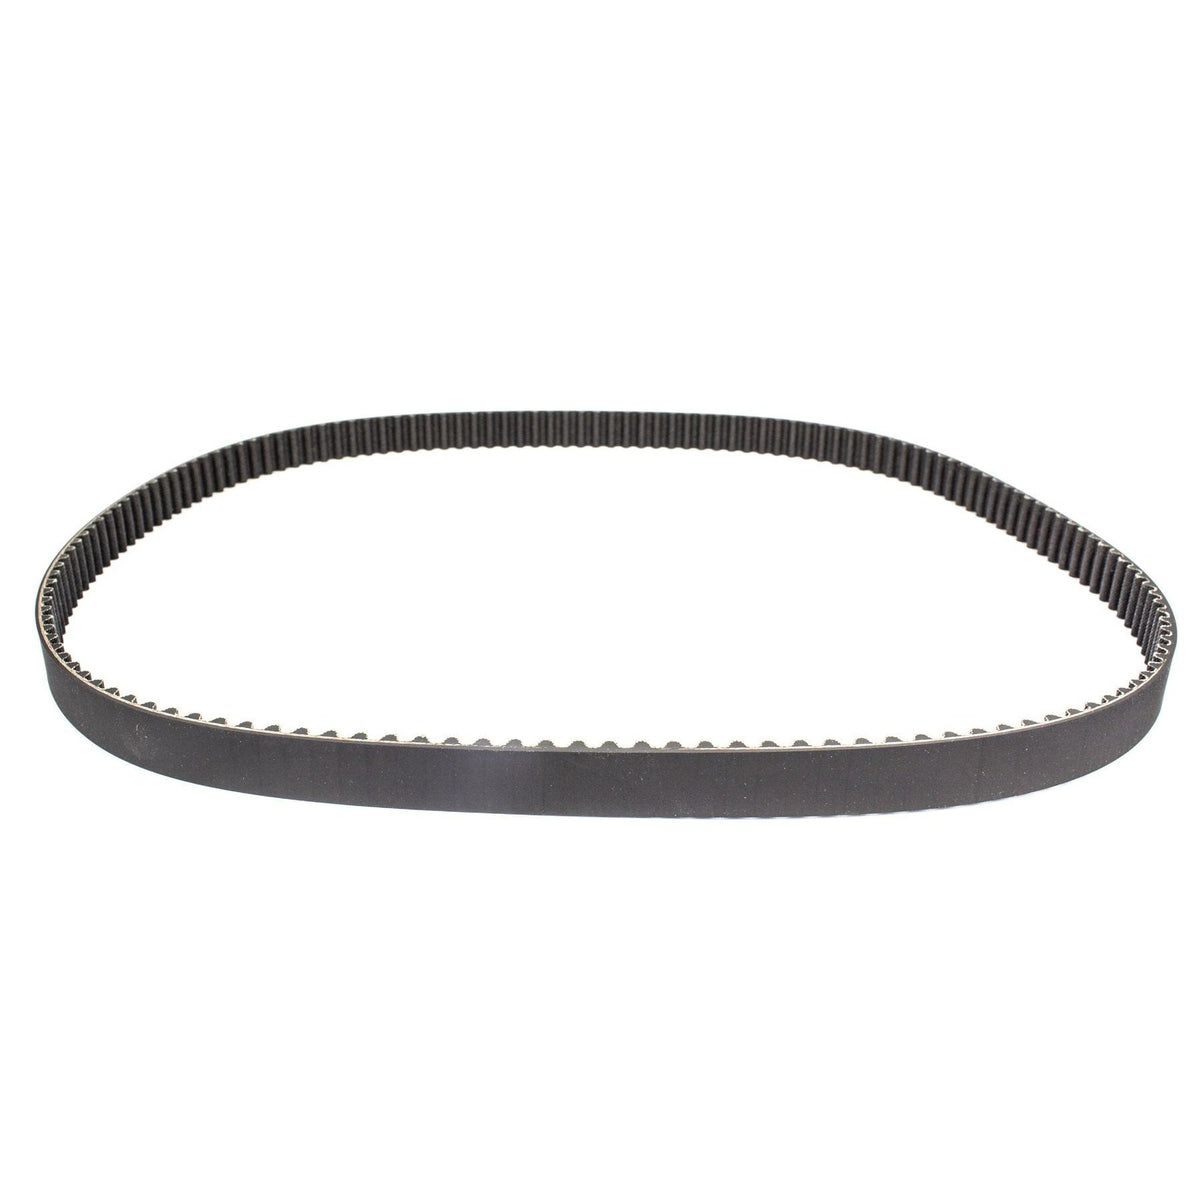 Sierra Not Qualified for Free Shipping Sierra Timing Belt Yamaha #18-15142